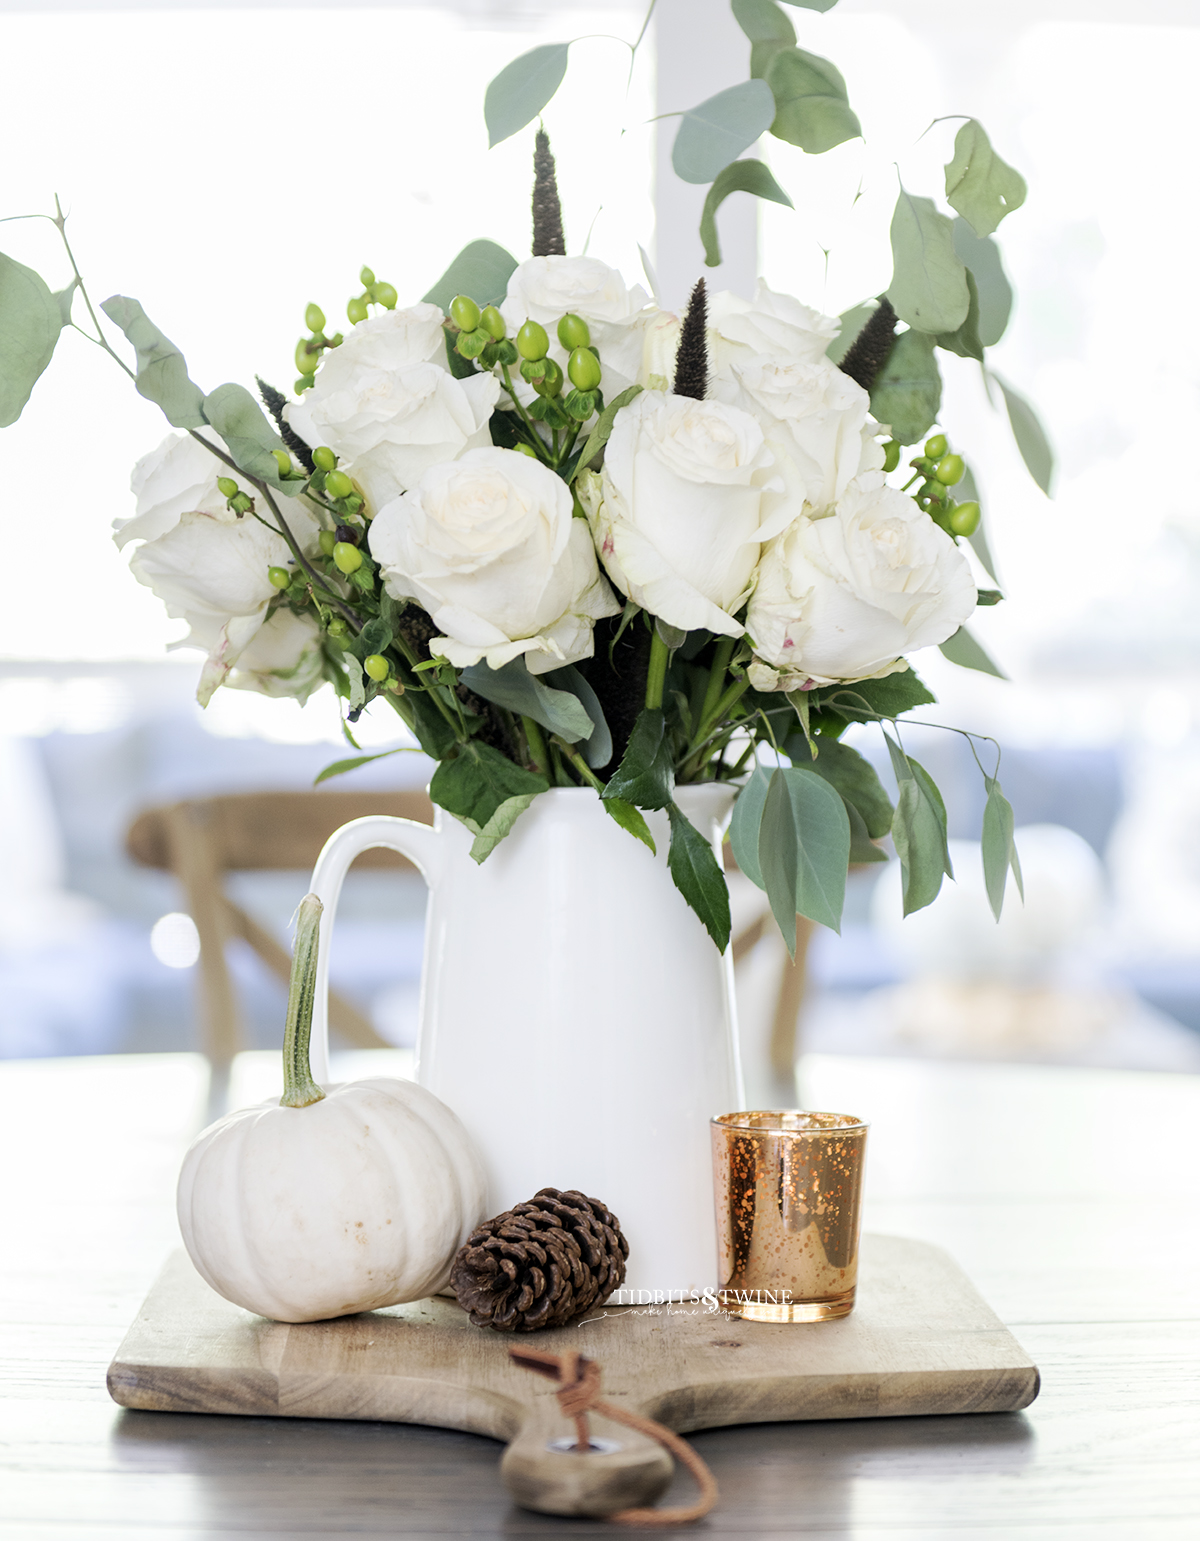 Fall kitchen table centerpiece with white pitcher holding roses and eucalyptus and small white pumpkin at base